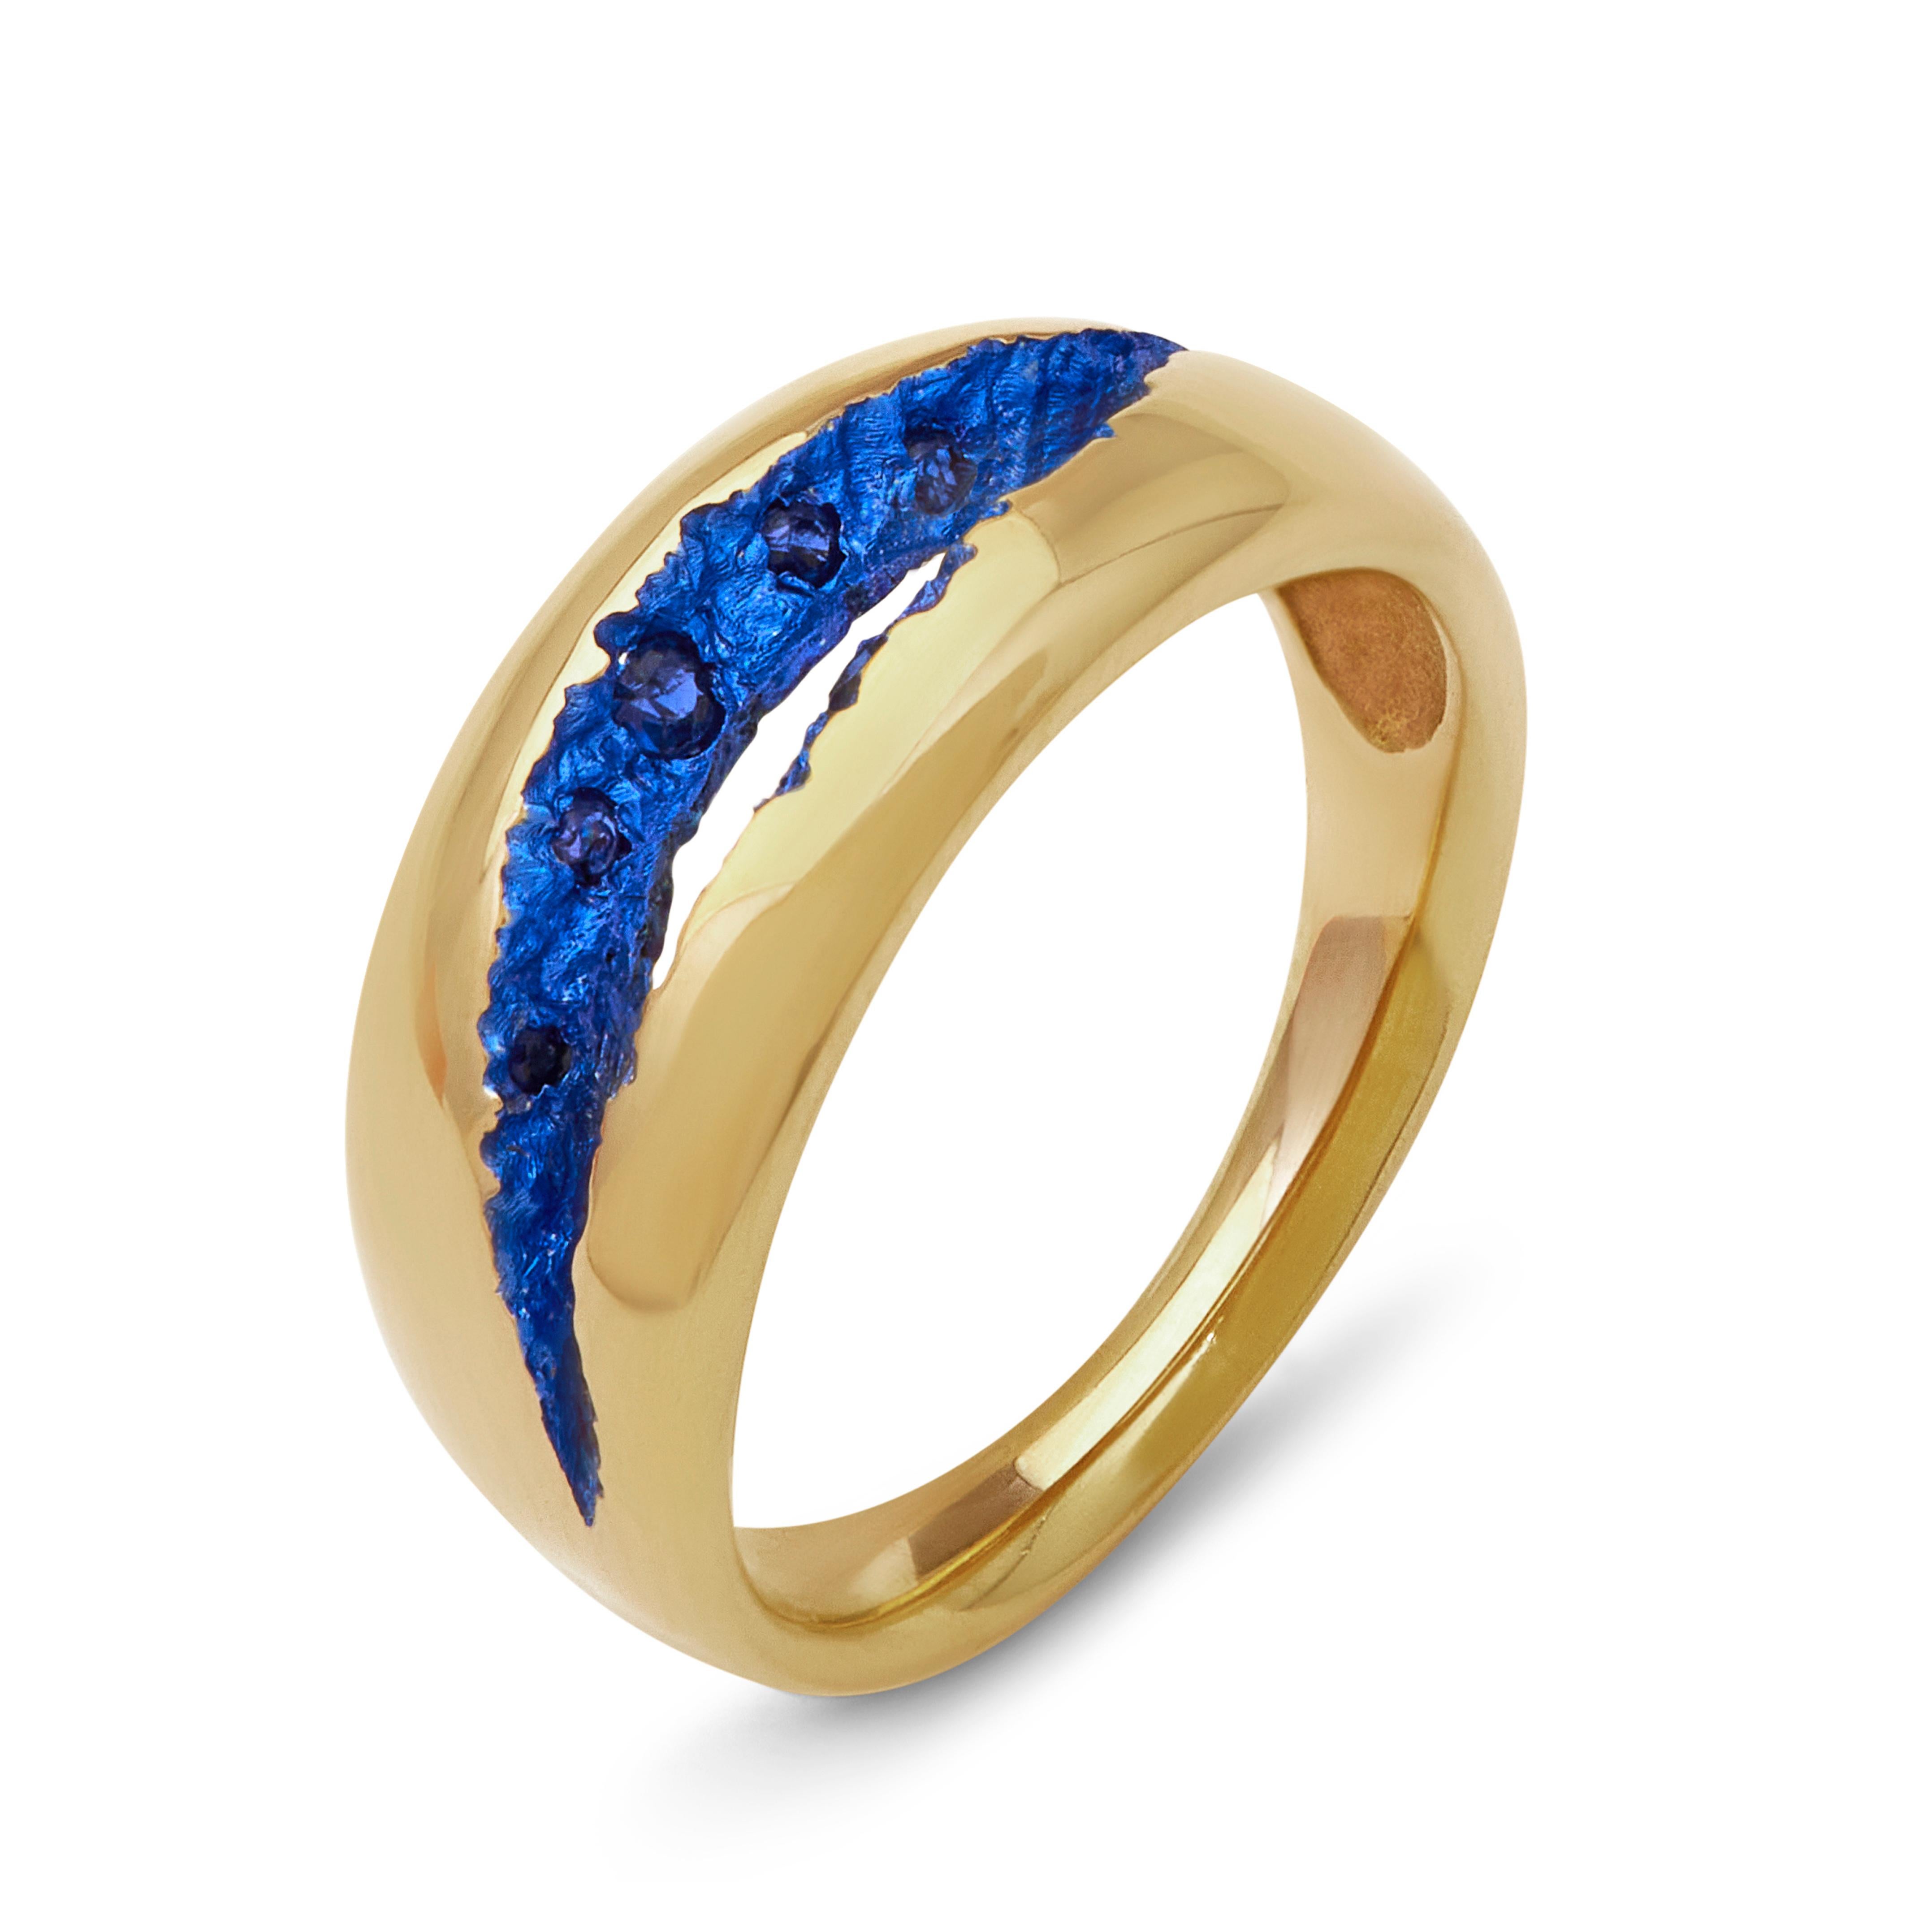 This wide band is a simple jewellery design focusing on the textures of the crevasse teamed with a sprinkling of blue sapphires for a contrasting sparkle peering out.  The overlay of blue ceramic plating is what truly sets it apart from other rings,